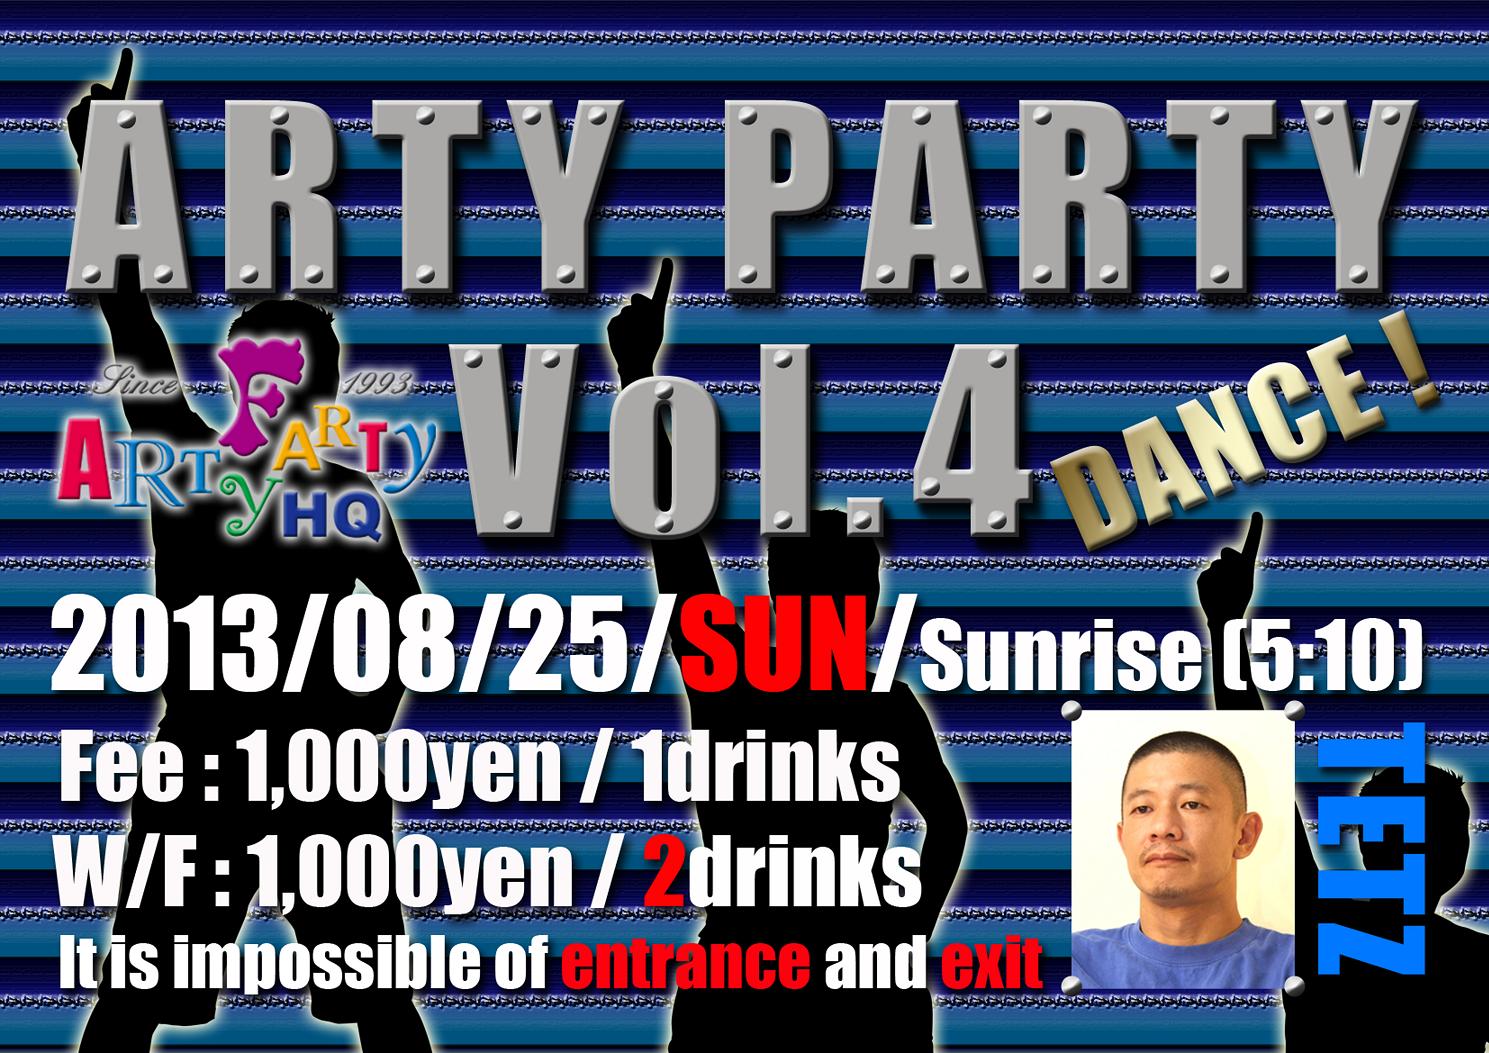 AFTER HOURS PARTY “ARTY PARTY”Vol.4  - 1489x1053 307kb